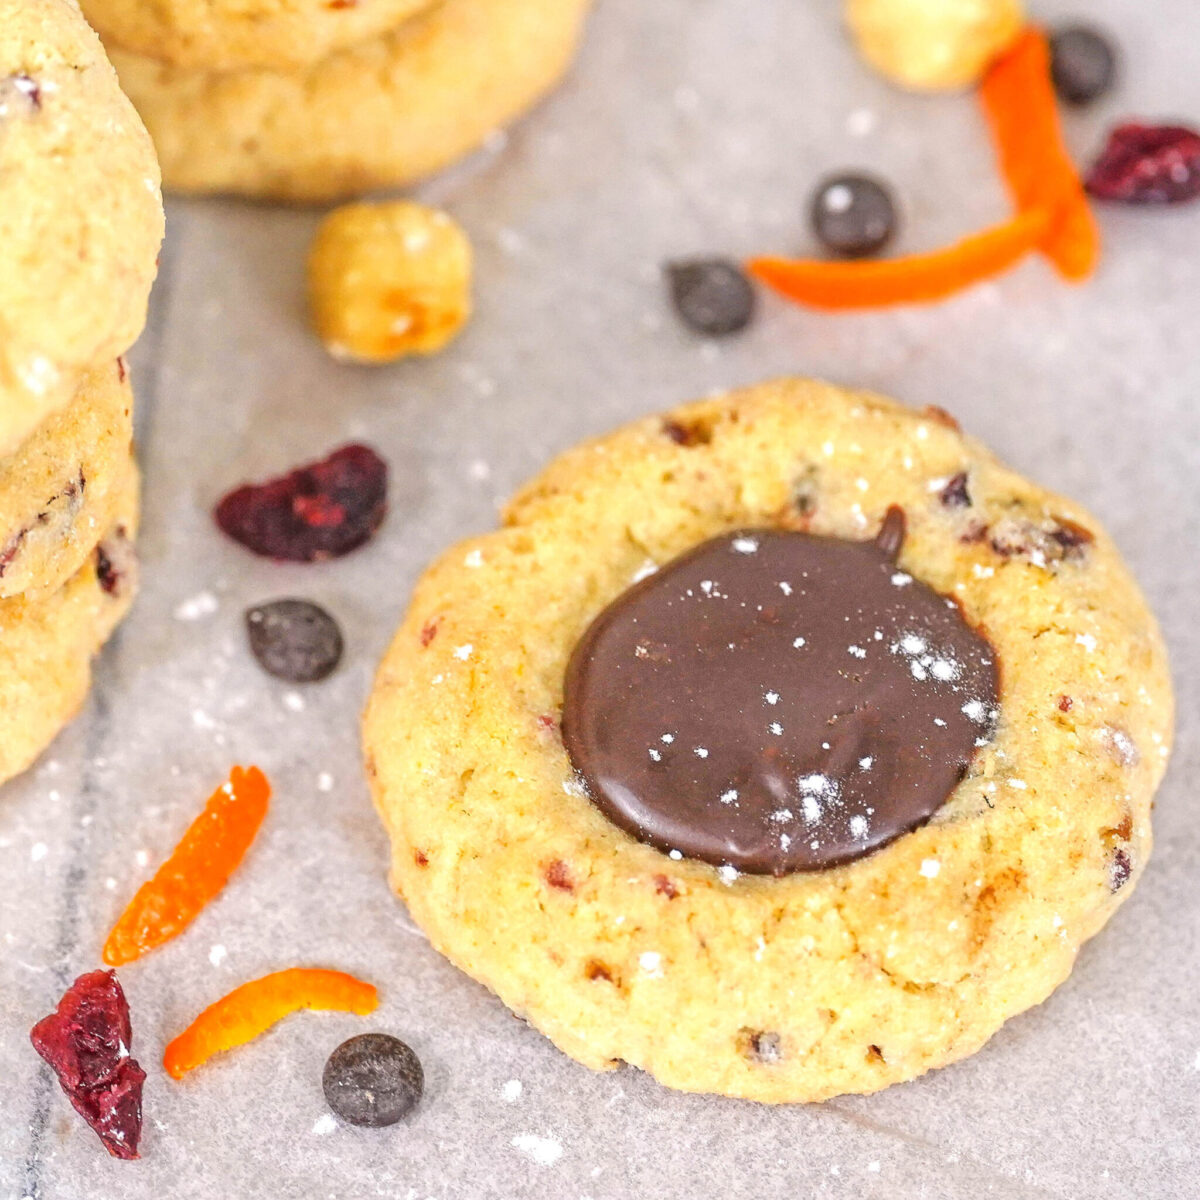 cranberry, hazelnut thumbprint cookies filled with creamy chocolate ganache